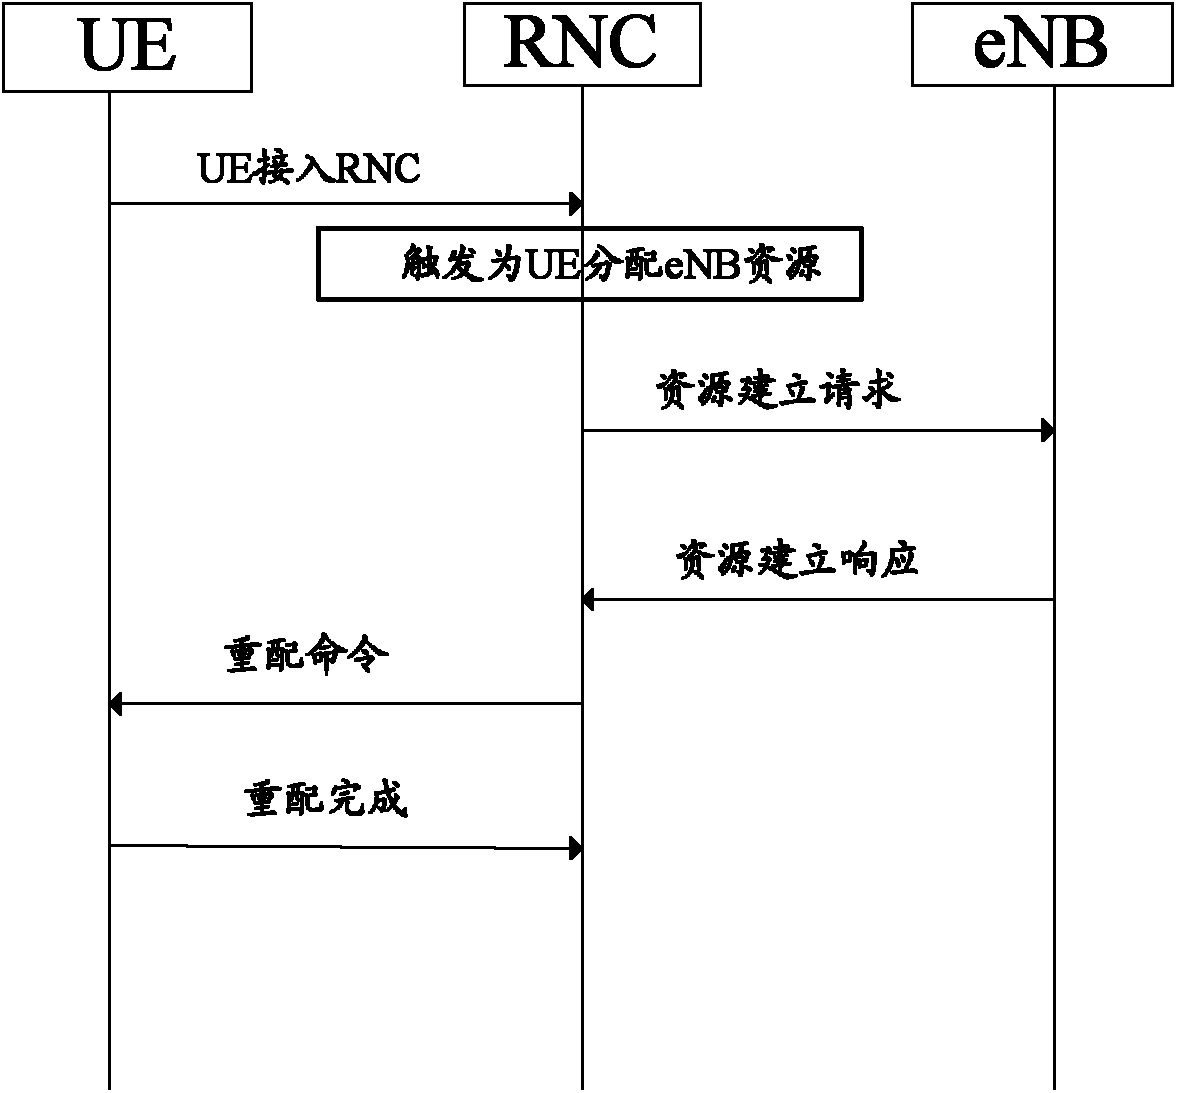 Carrier aggregation method and system for third-generation (3G) network and fourth-generation (4G) network